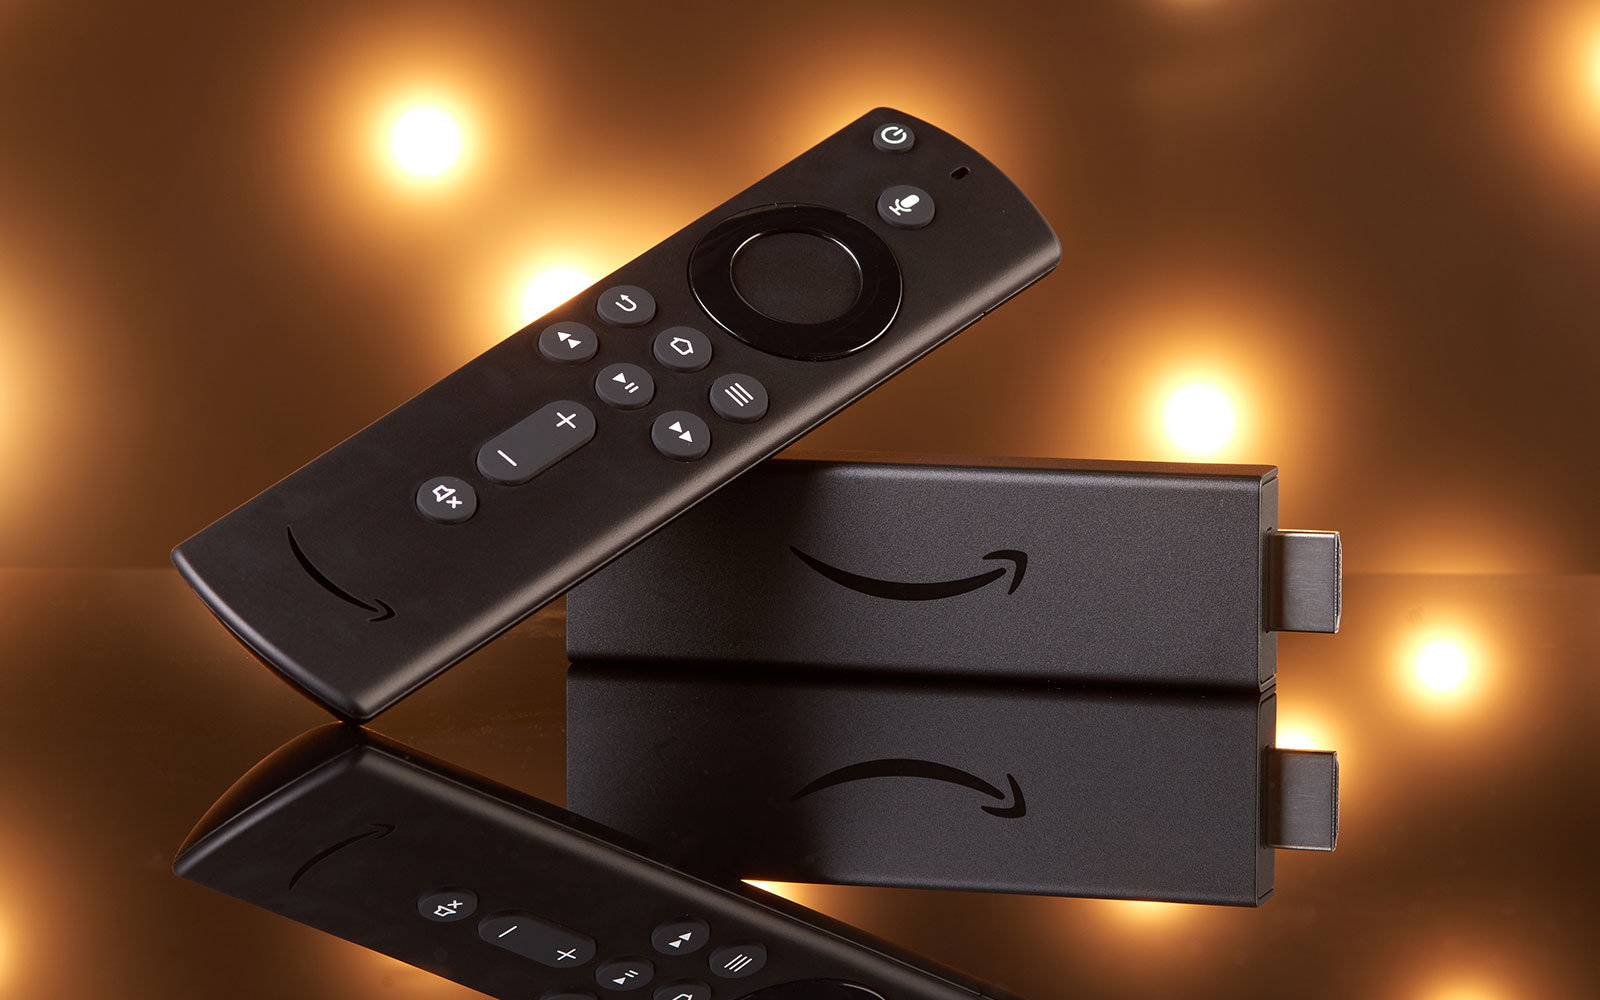 What’s good about Amazon’s Fire TV Stick? | Engadget